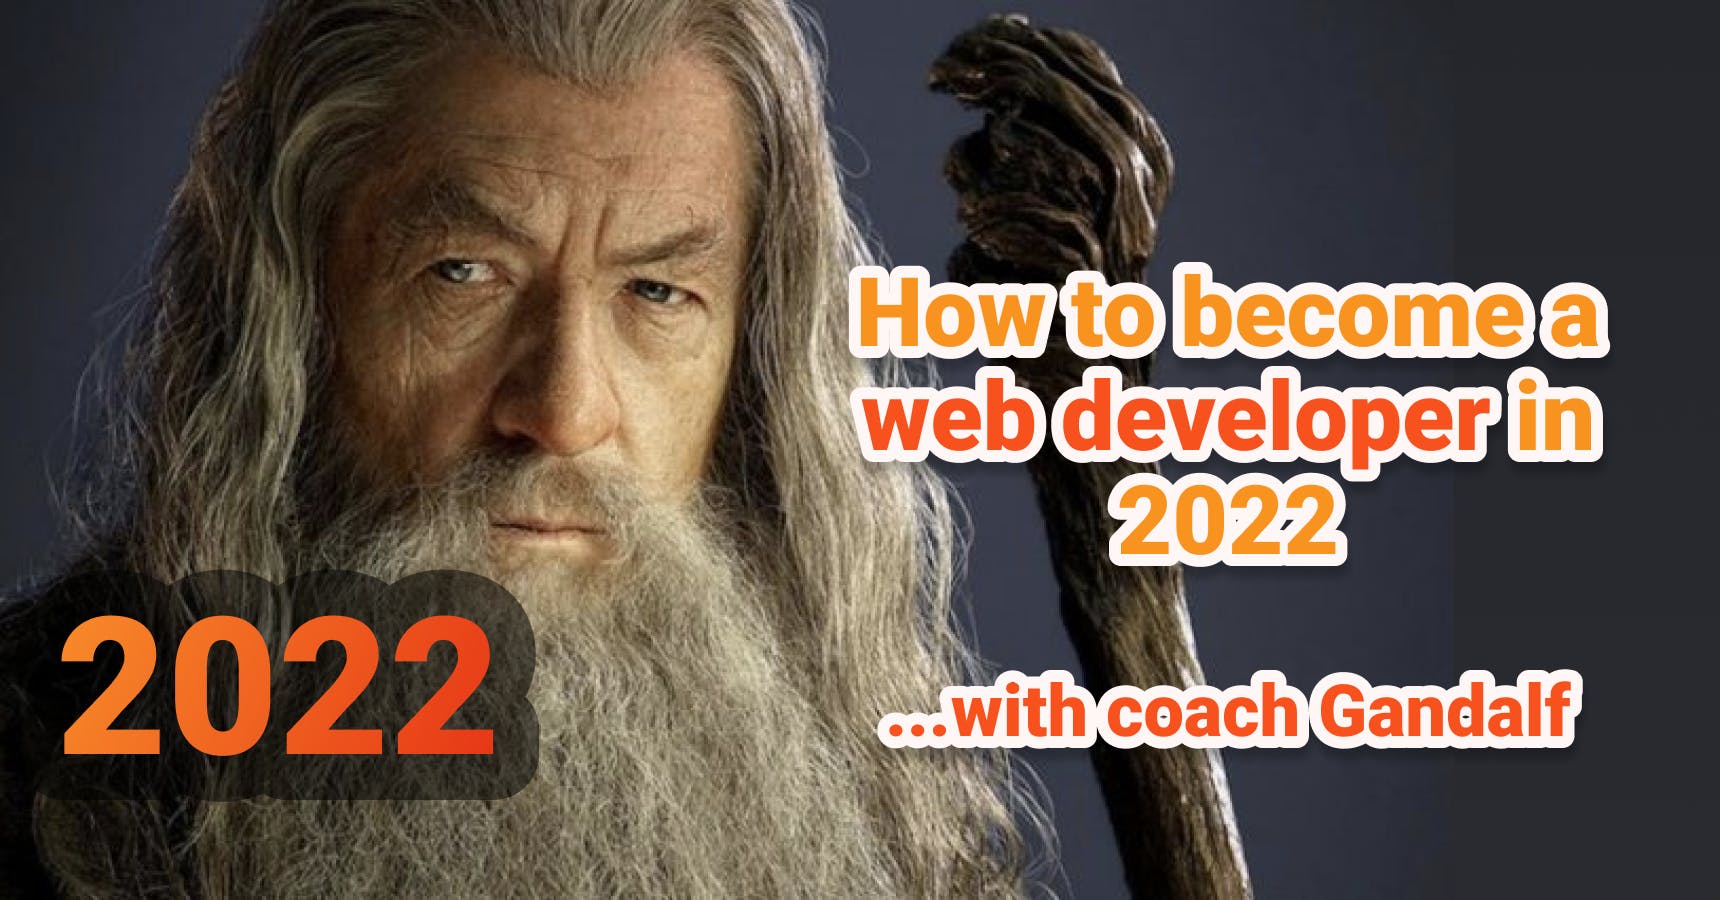 /coach-gandalf-guides-you-how-to-become-a-web-developer-in-2022 feature image